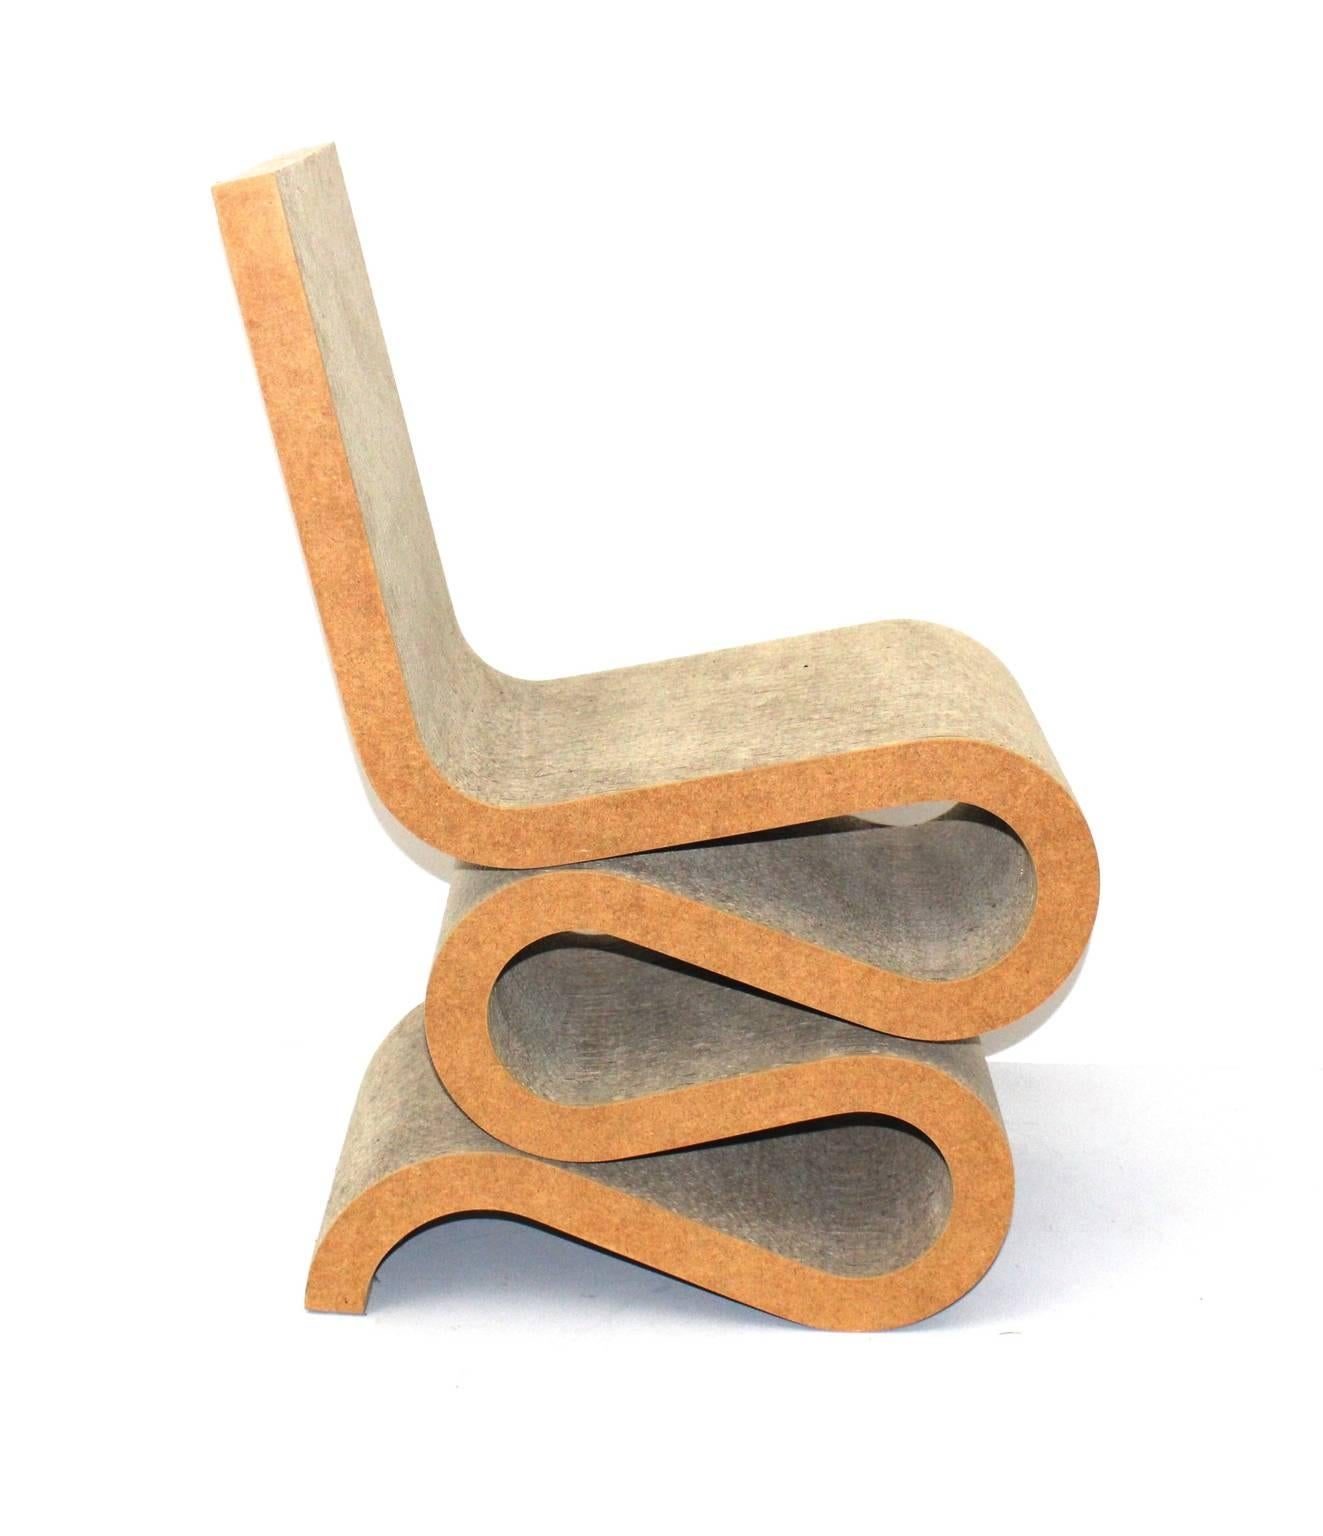 A mid century modern vintage cardboard wiggle chair, which is a great design side chair by Frank O. Gehry, 1972 for Jack Brogan, USA 1972-1973.
Reissued by Vitra from 1992 as Wiggle side chair.
The vintage Wiggle Side Chair features a laminated and